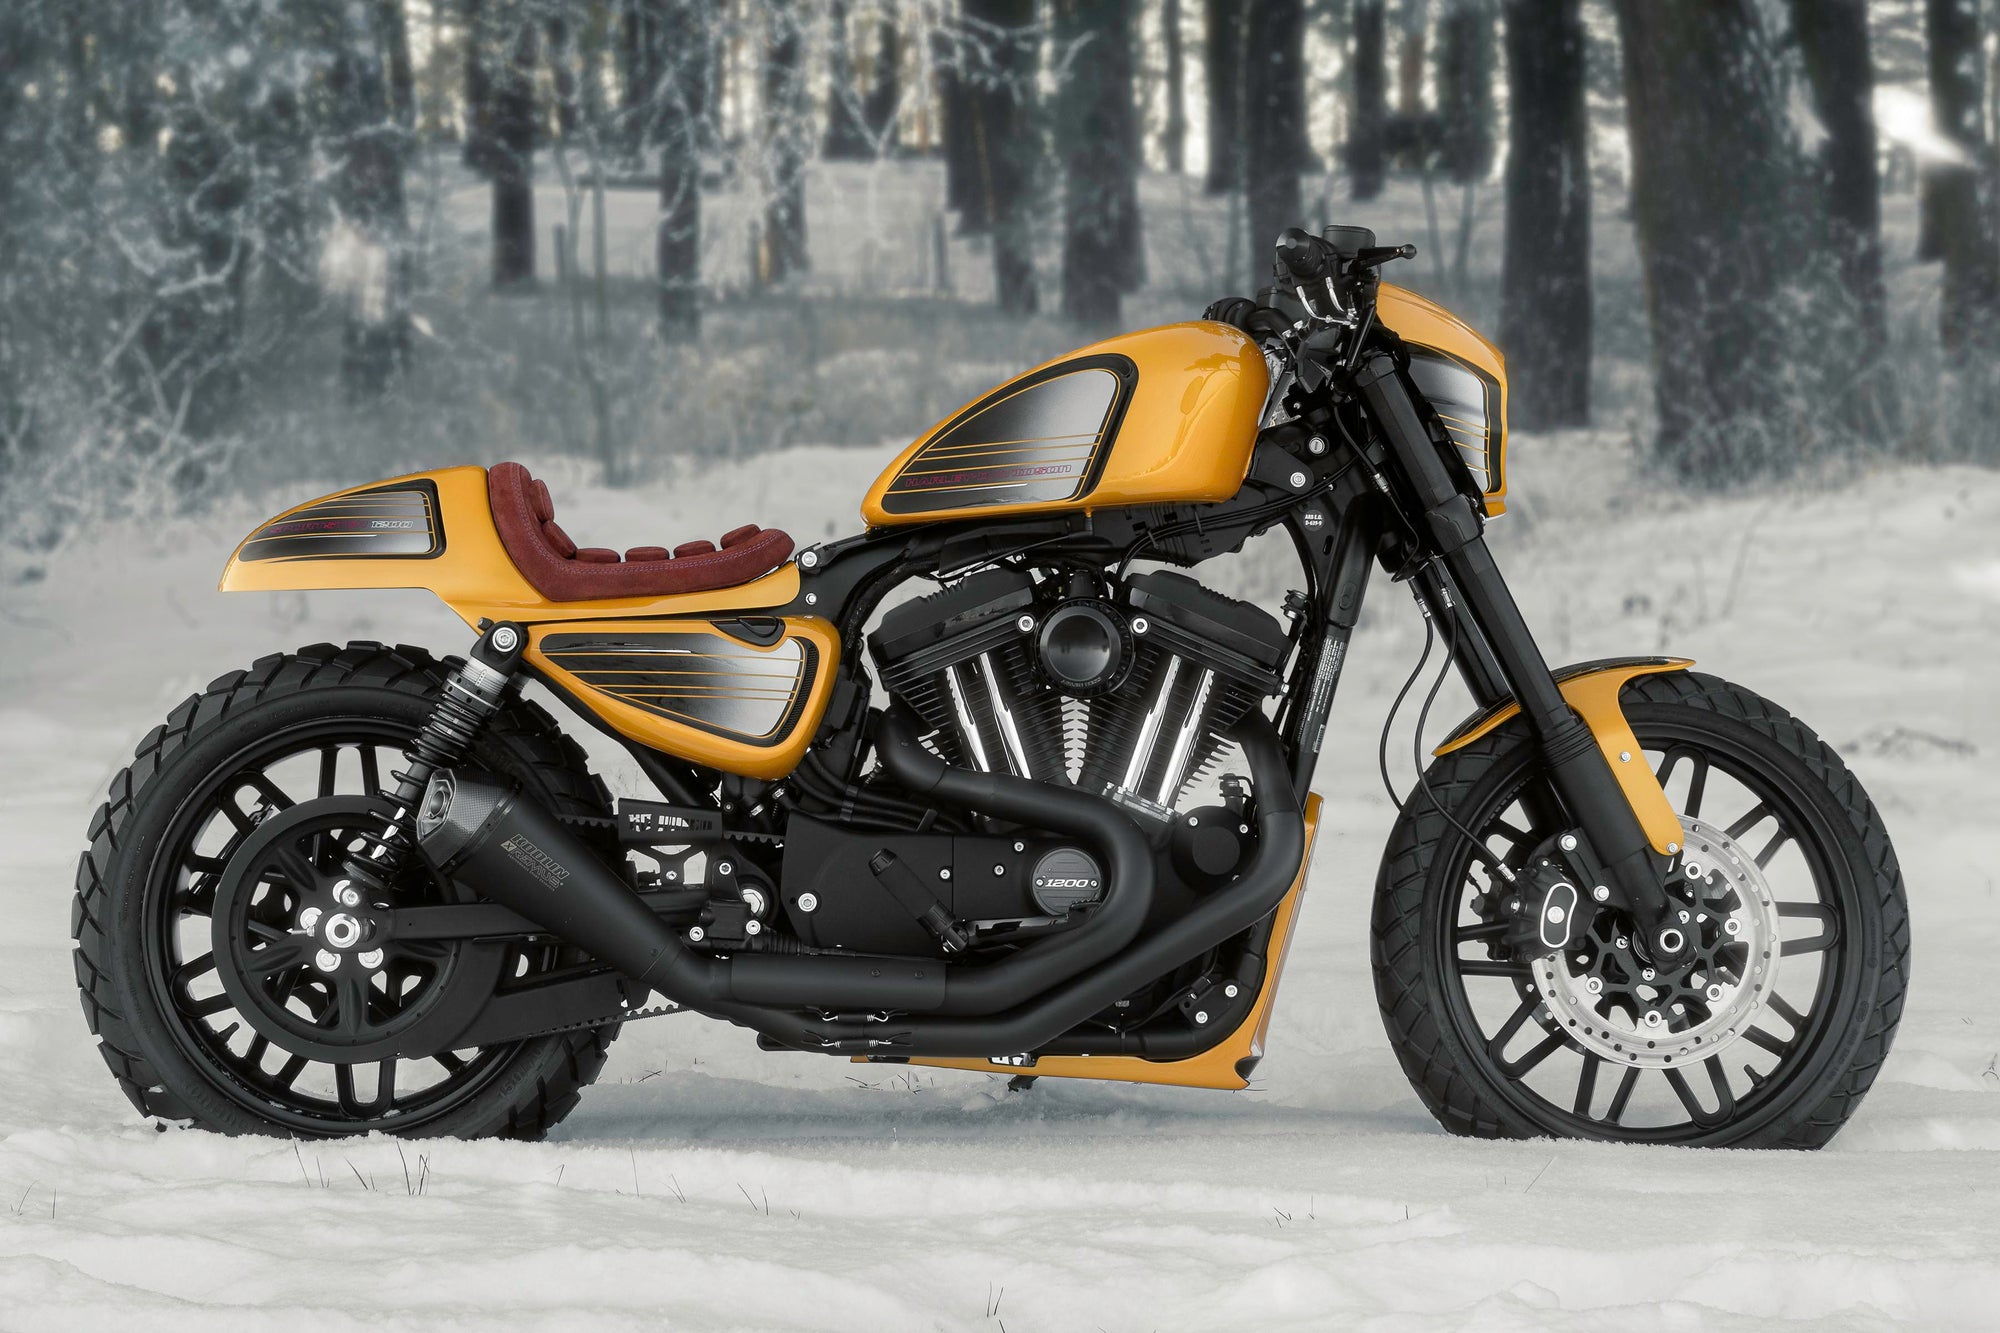 Modified Harley Davidson Roadster motorcycle with Killer Custom parts from the side outside on a winter day with some snowy trees in the background